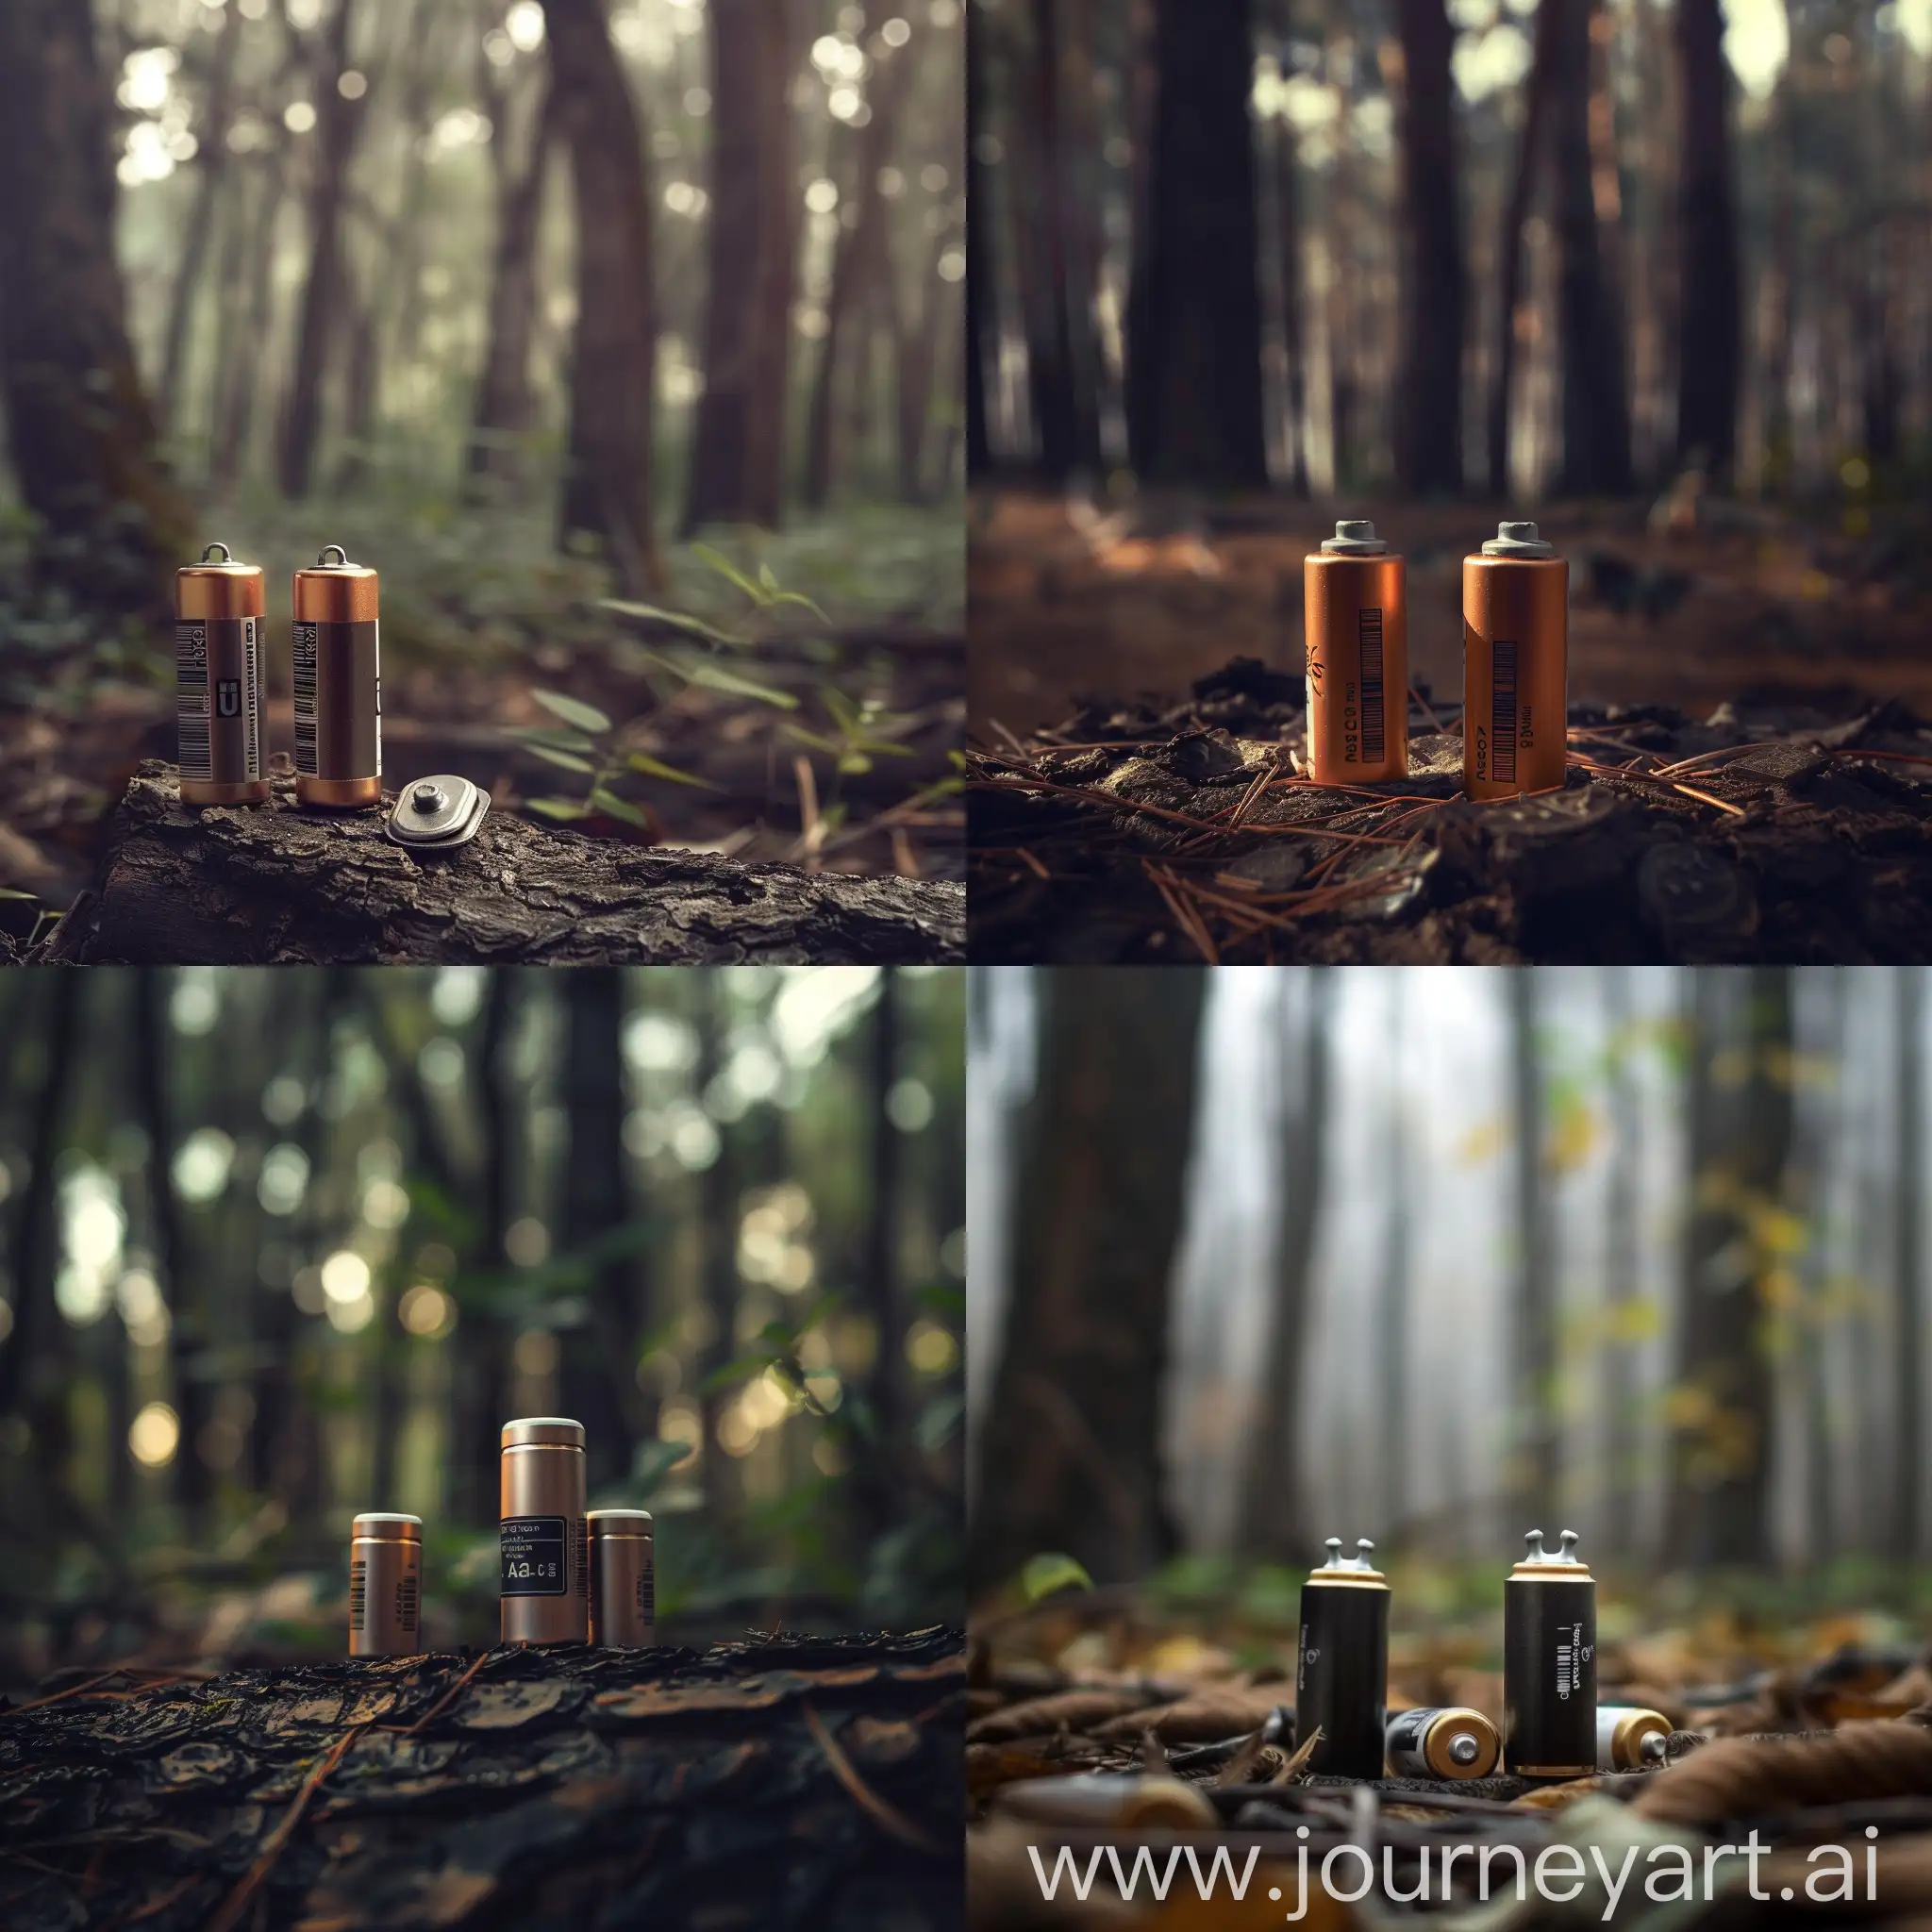 I want a photo that looks like a few aa batteries in a forest
